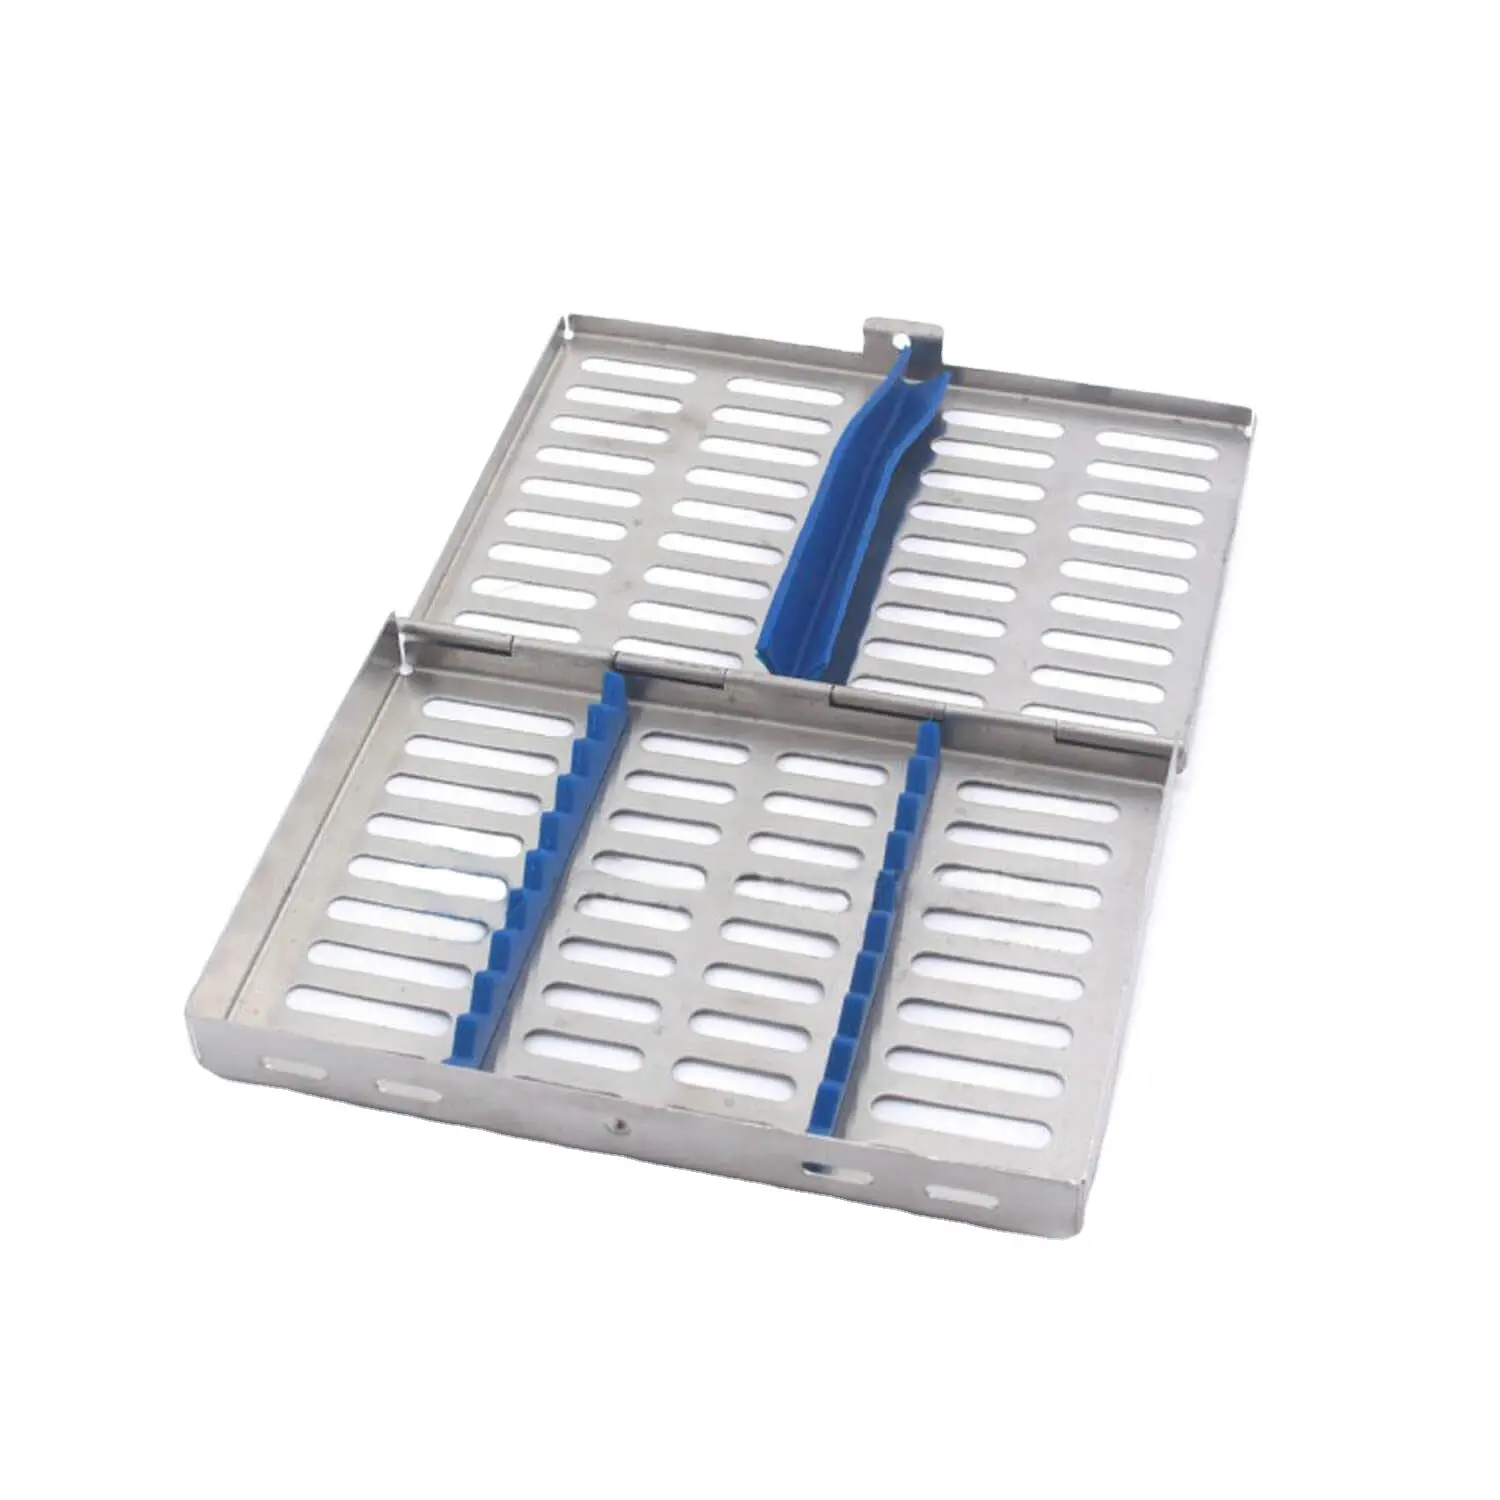 Stainless steel Dental Autoclave Sterilization Cassette Rack Box Tray for Instruments kit Made in Pakistan